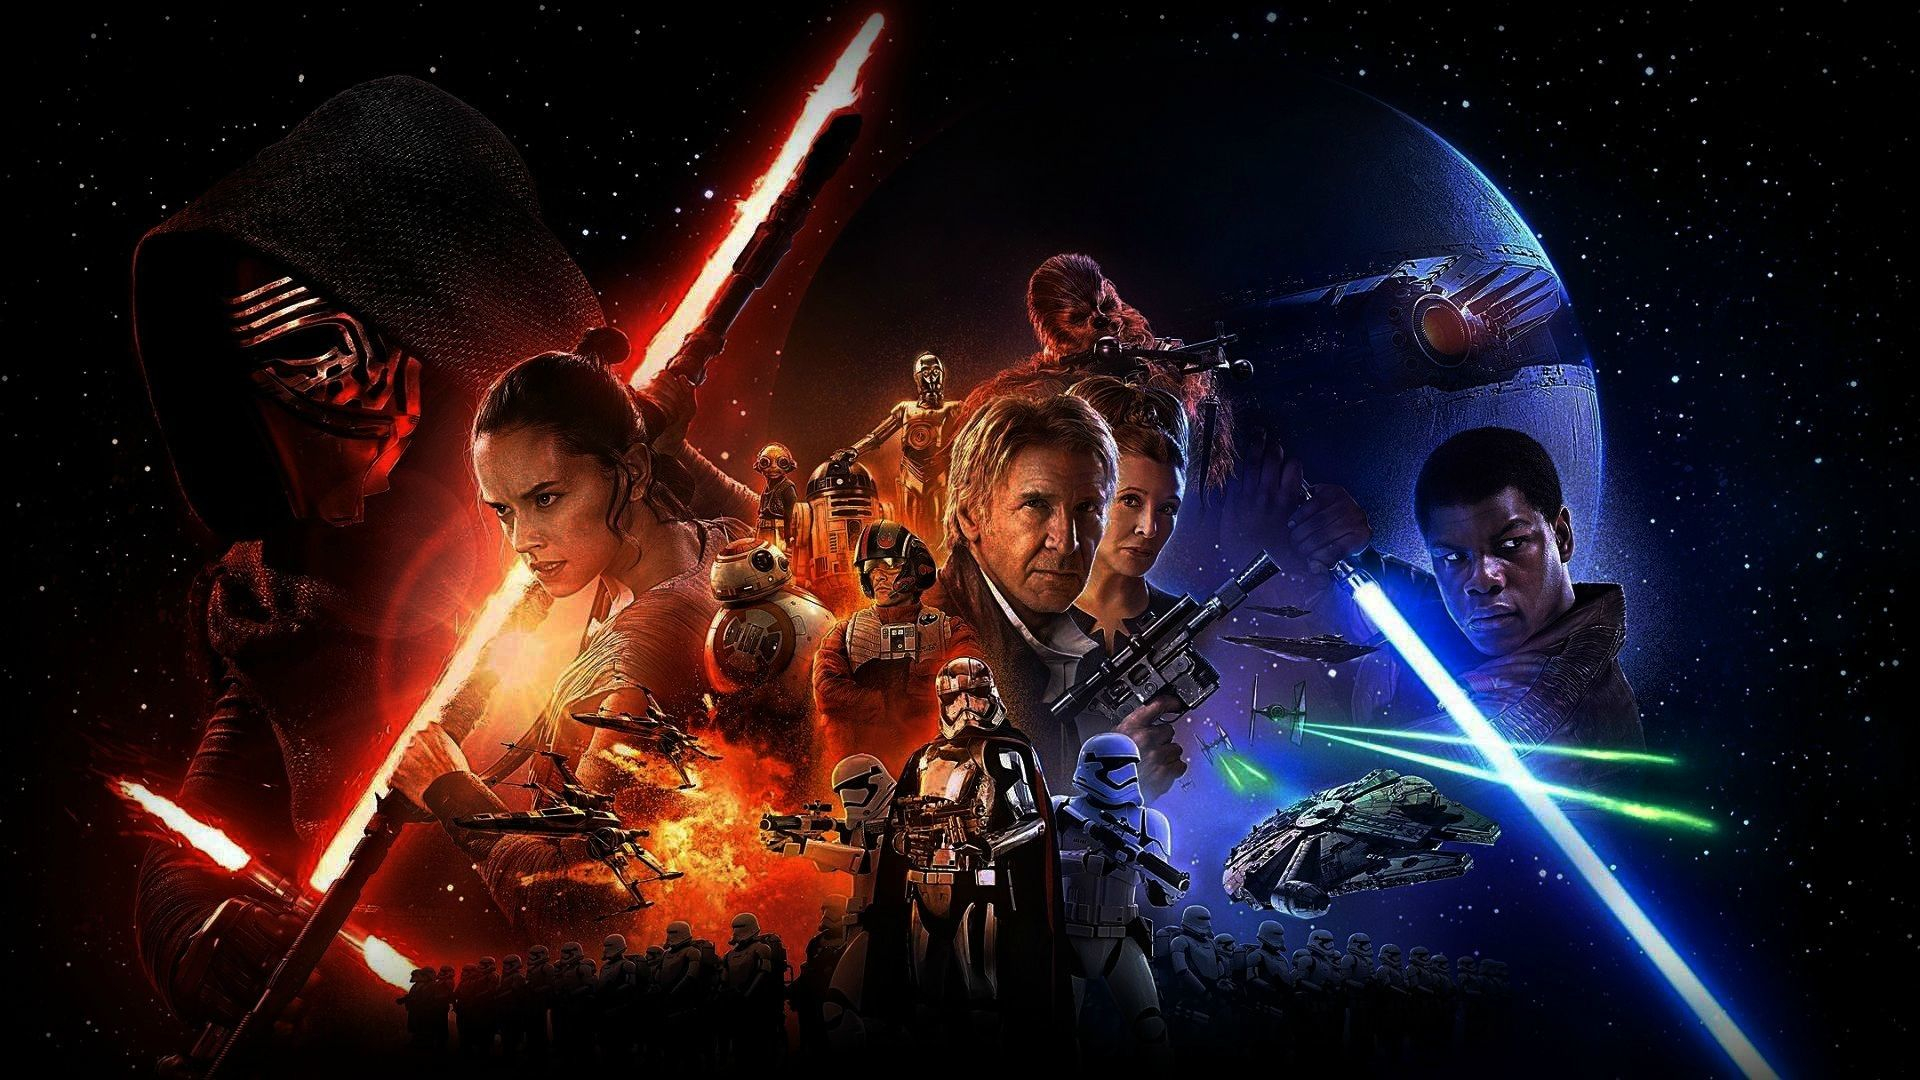 1920x1080 The Force Awakens Wallpapers Top Free The Force Awakens Backgrounds